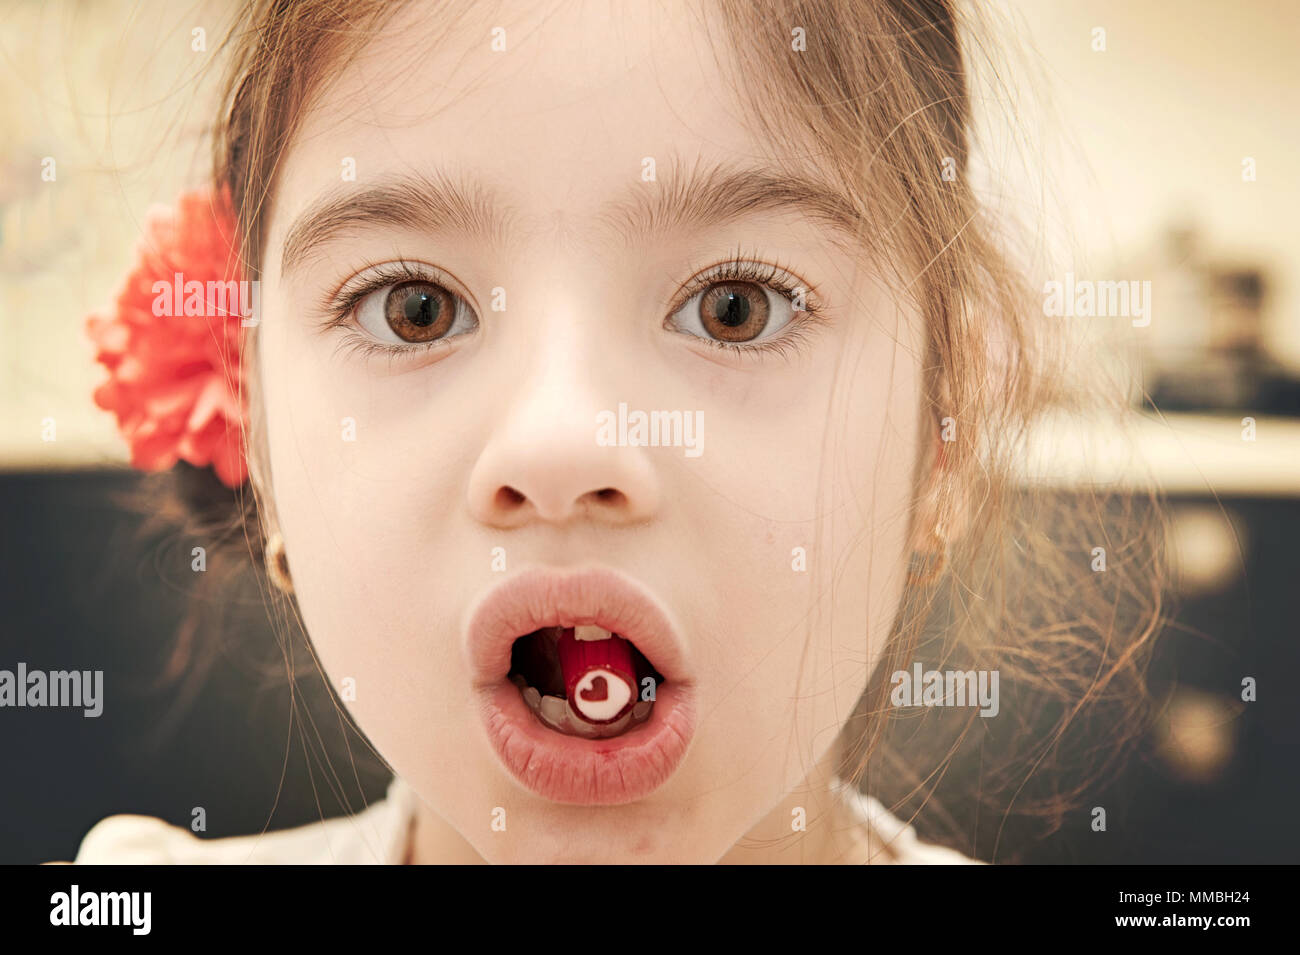 Little girl holding candy in mouth, hard candy with red heart shape,Istanbul Stock Photo